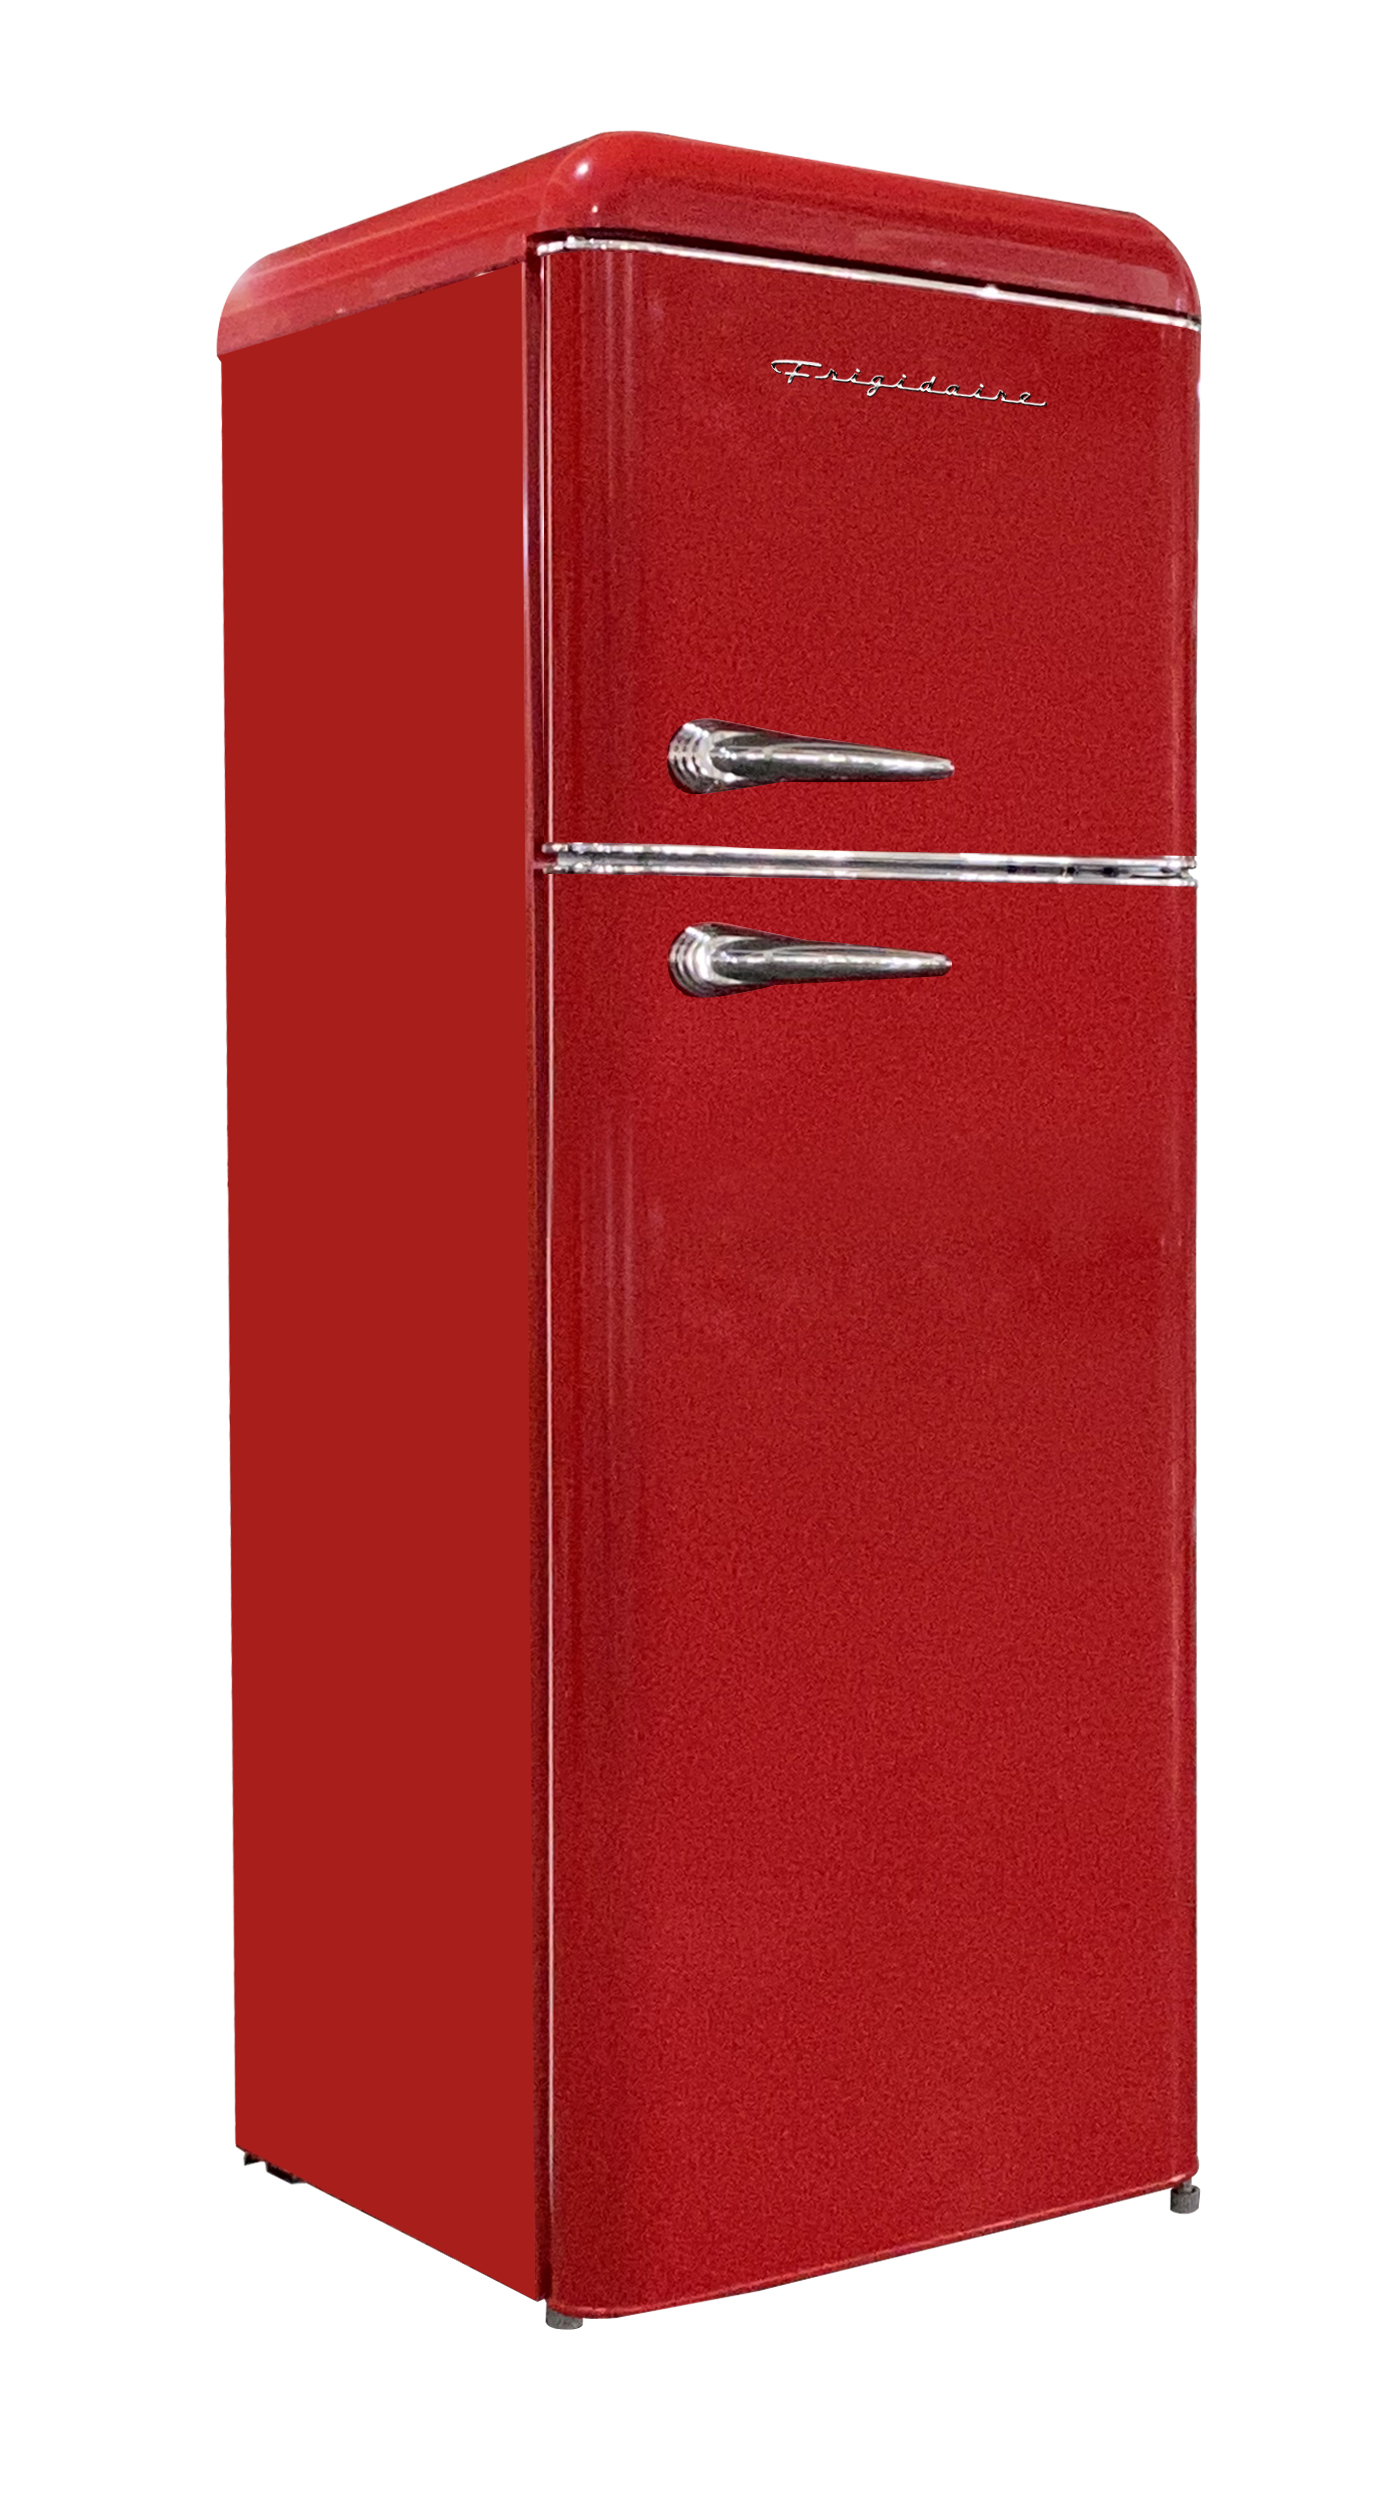 Frigidaire 7.5 Cu. Ft. Top Freezer Refrigerator in RED, Rounded Corners - RETRO, EFR756 - image 2 of 5